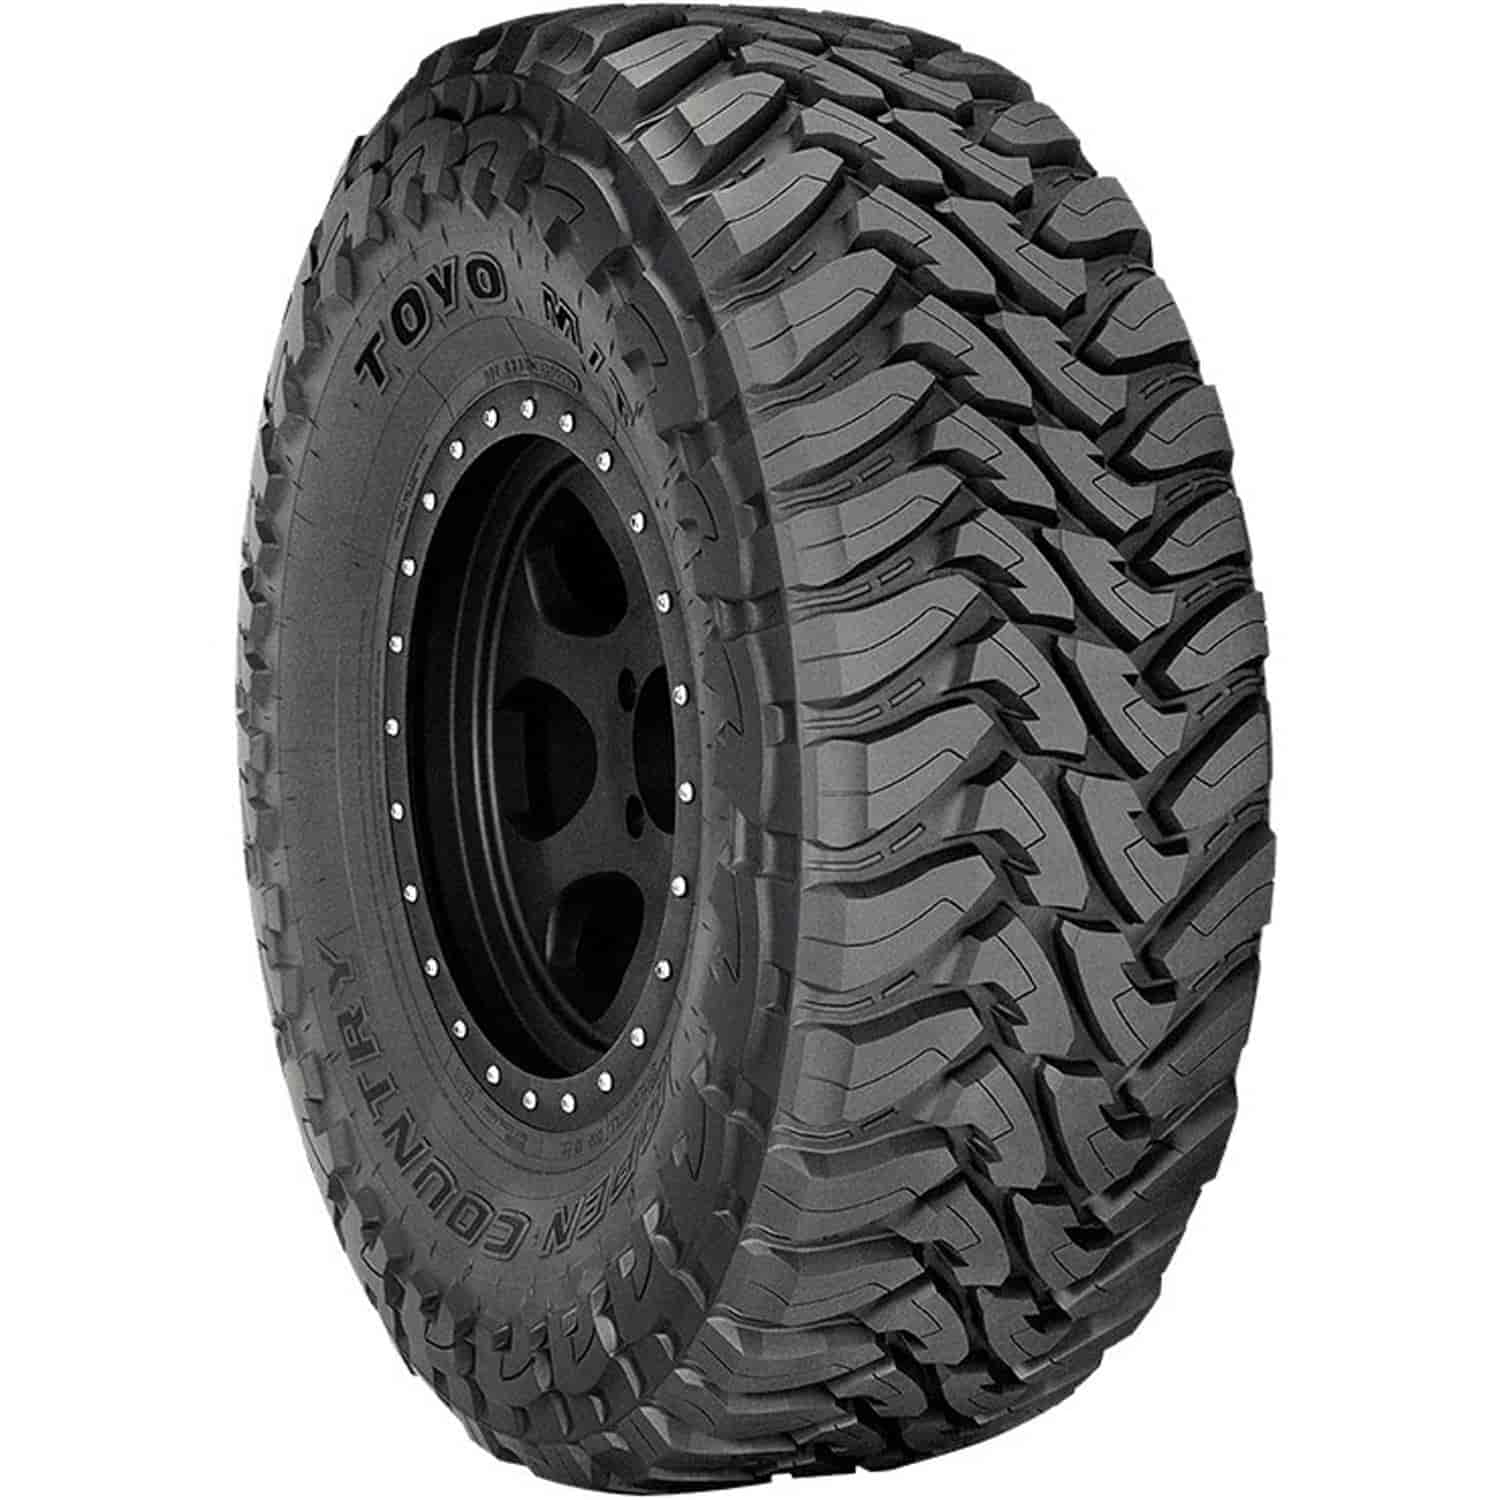 Open Country M/T Tire 37x13.50R22LT